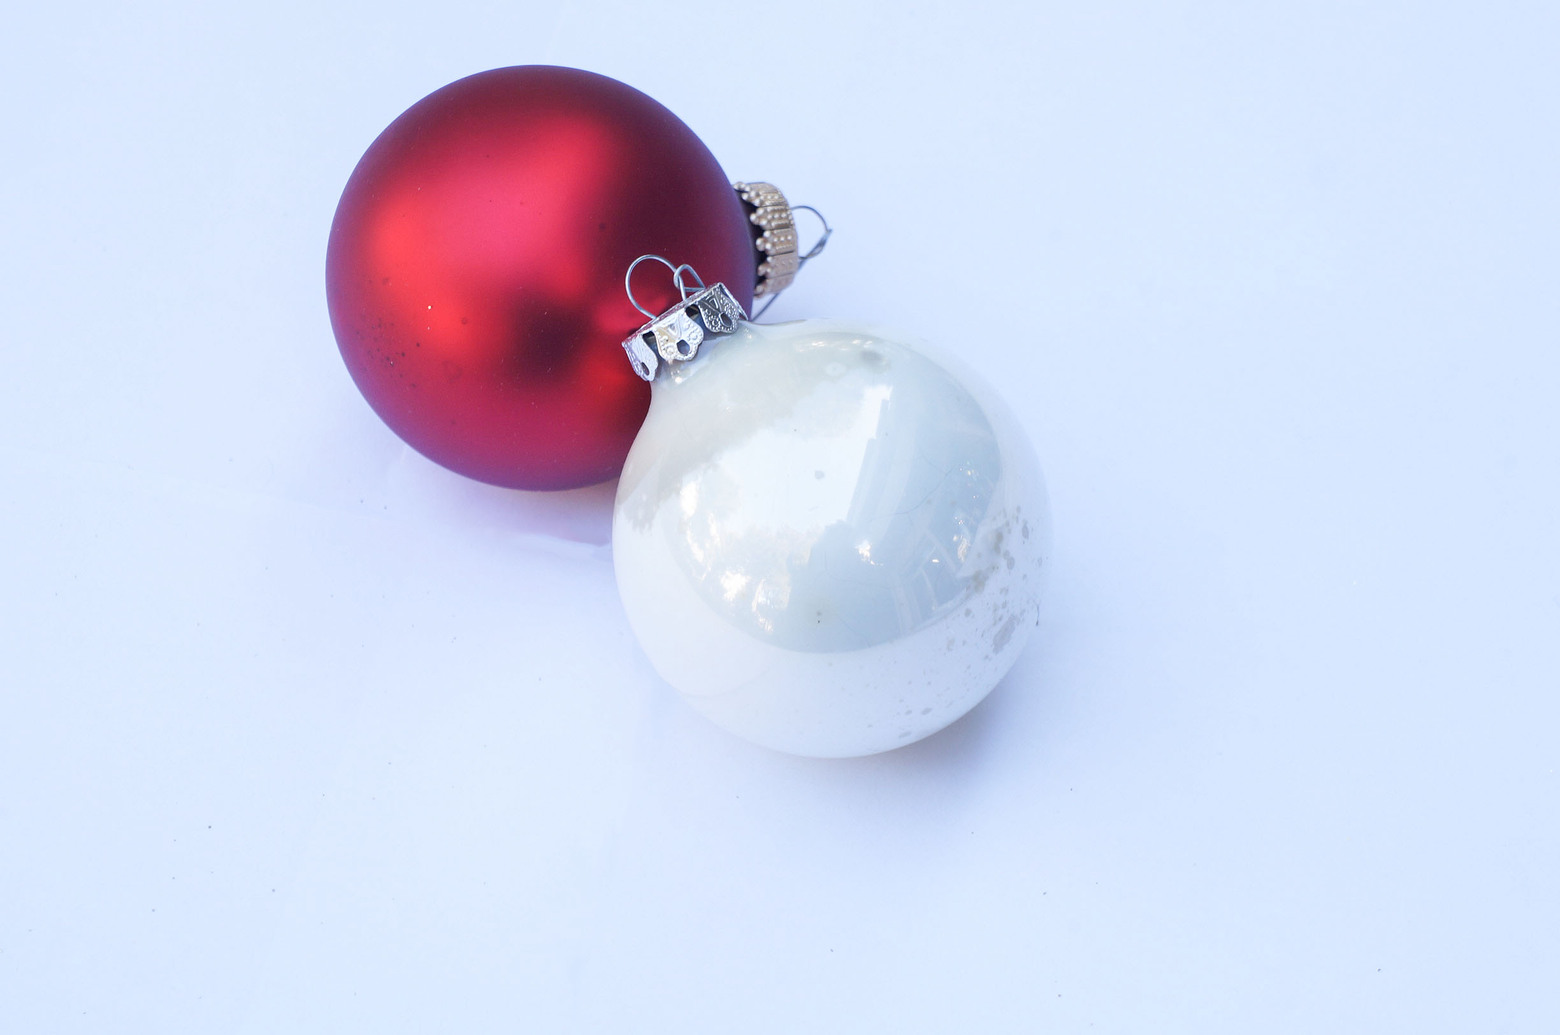 Vintage Blown Glass Christmas Ball Ornament/ヴィンテージ クリスマス オーナメント 吹きガラス ボール レトロ 6個セット 10